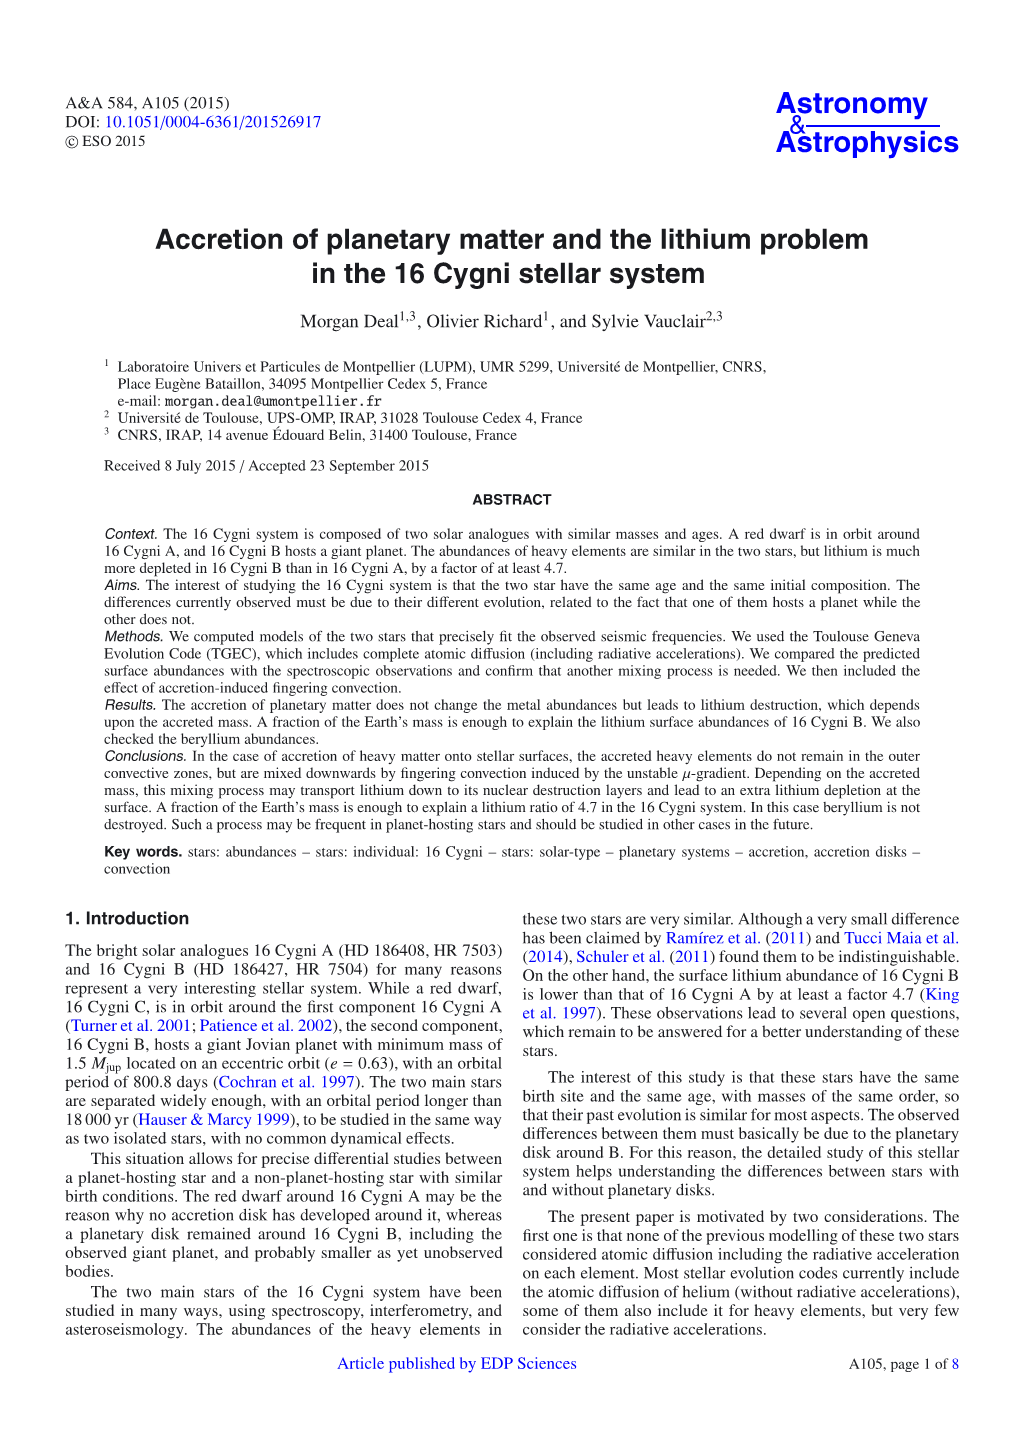 Accretion of Planetary Matter and the Lithium Problem in the 16 Cygni Stellar System